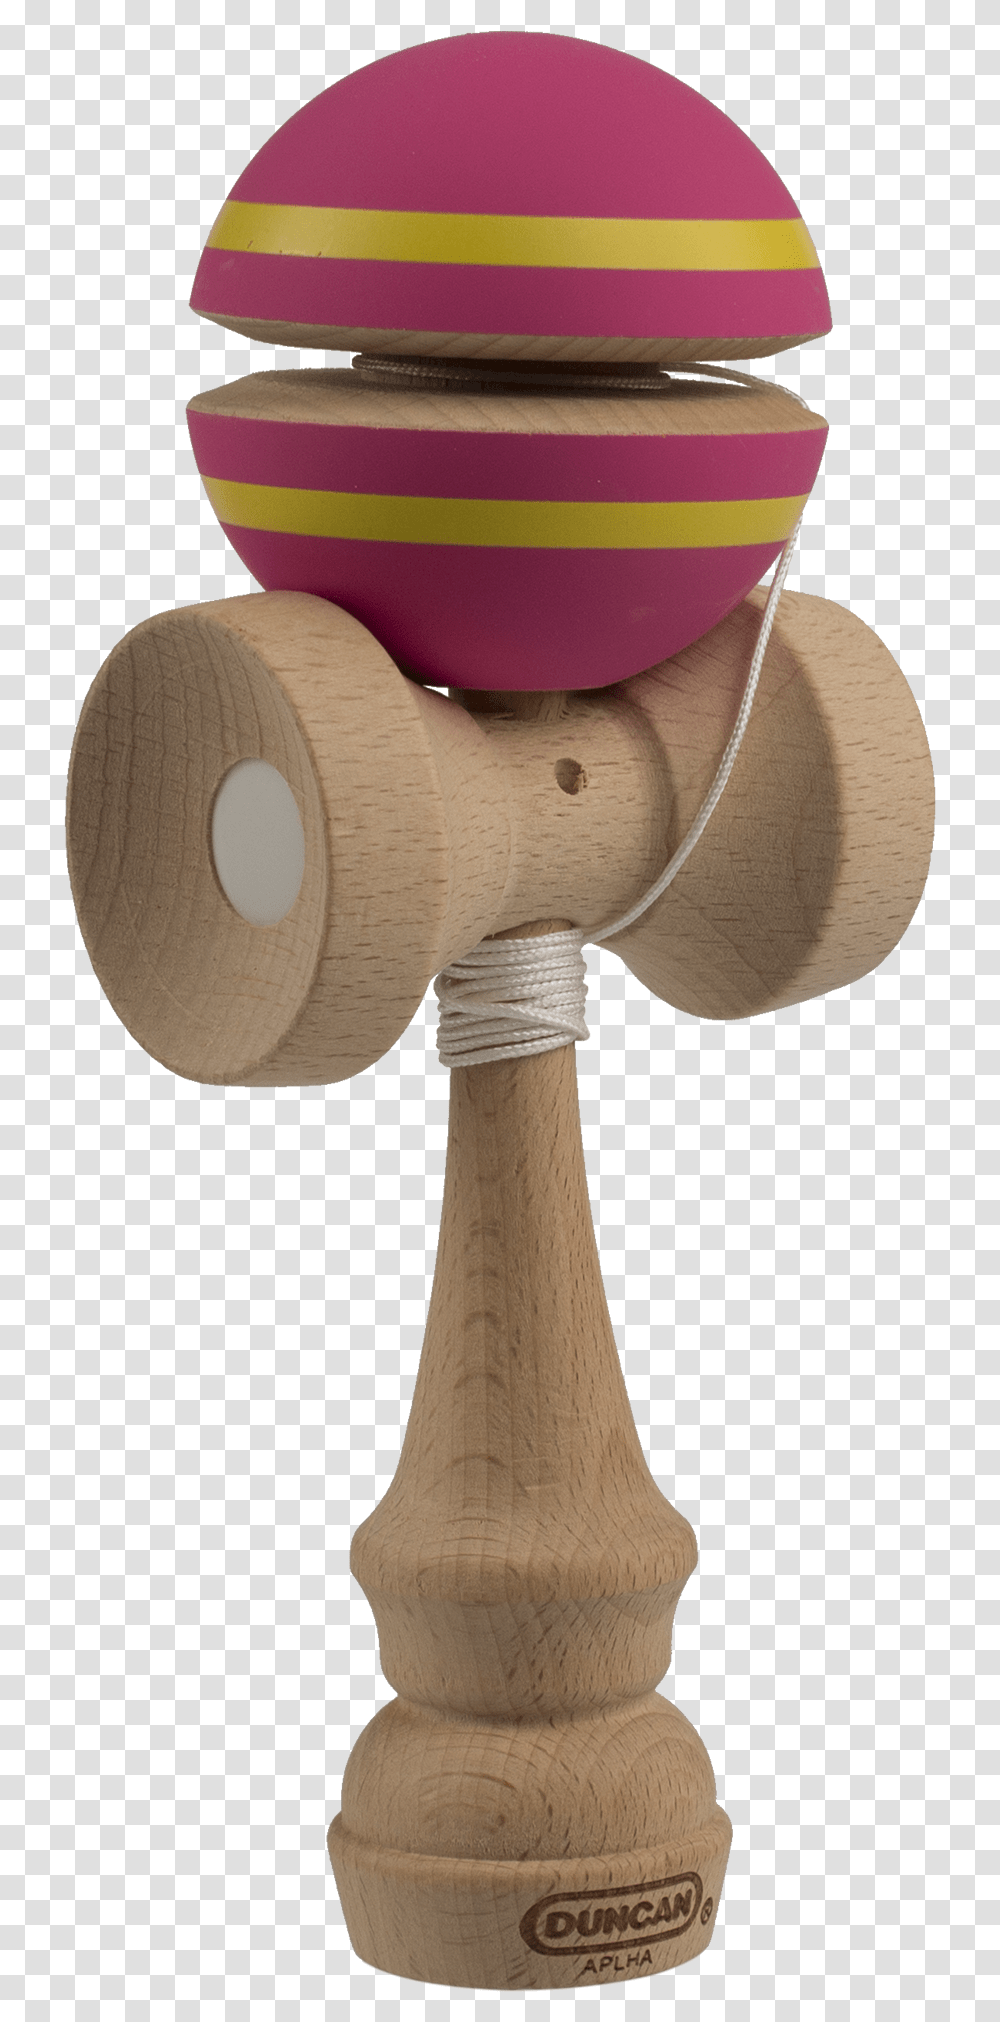 Kendama Single Duncan Toys Groove Kendama Toy, Tool, Plant, Rattle, Agaric Transparent Png